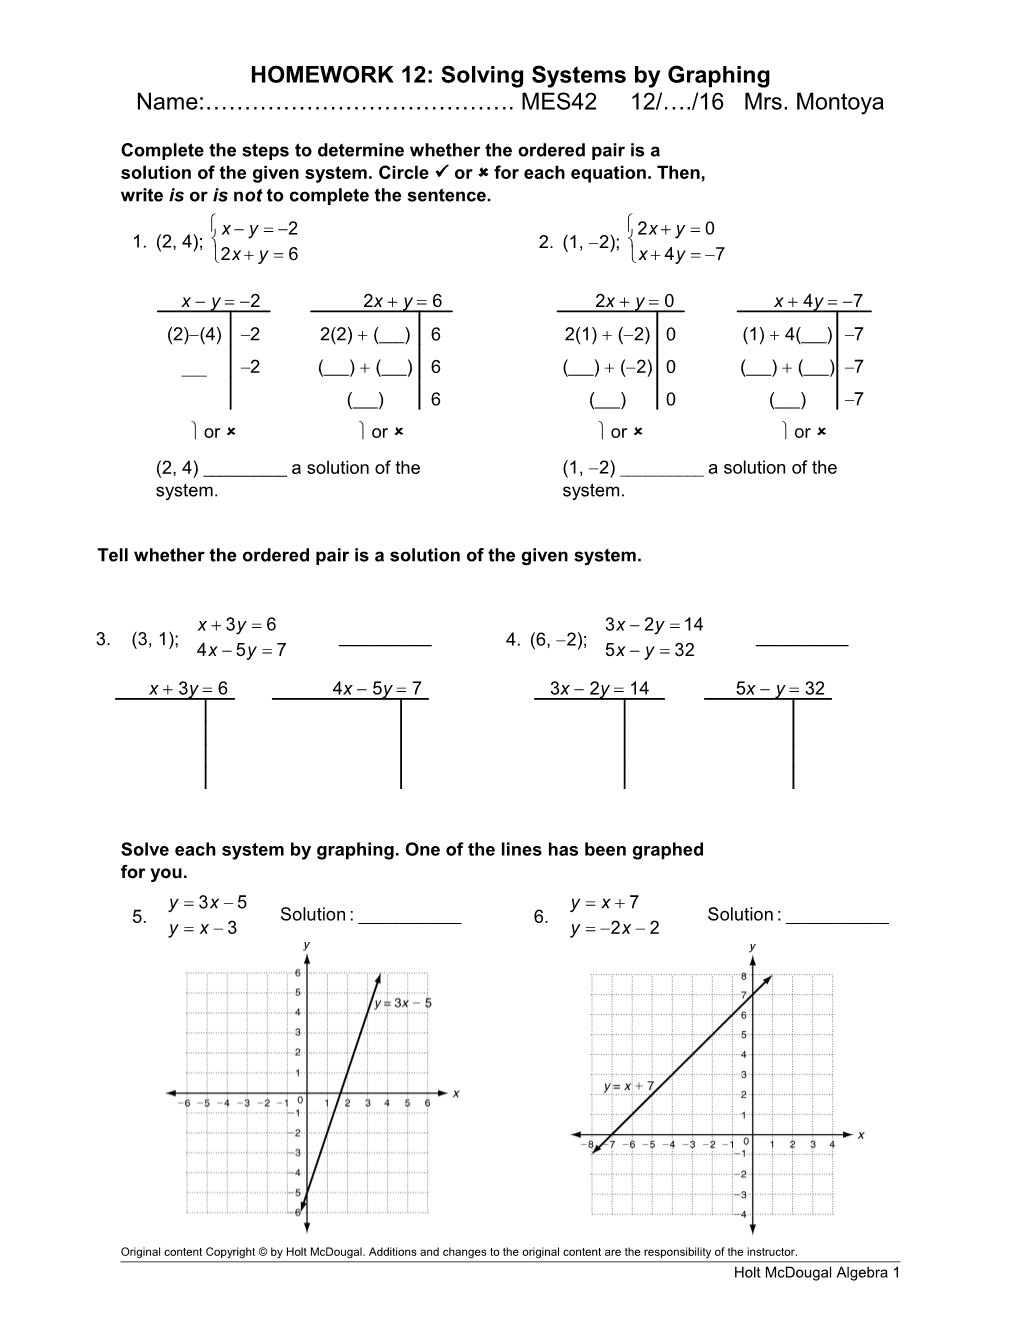 HOMEWORK 12: Solving Systems by Graphing